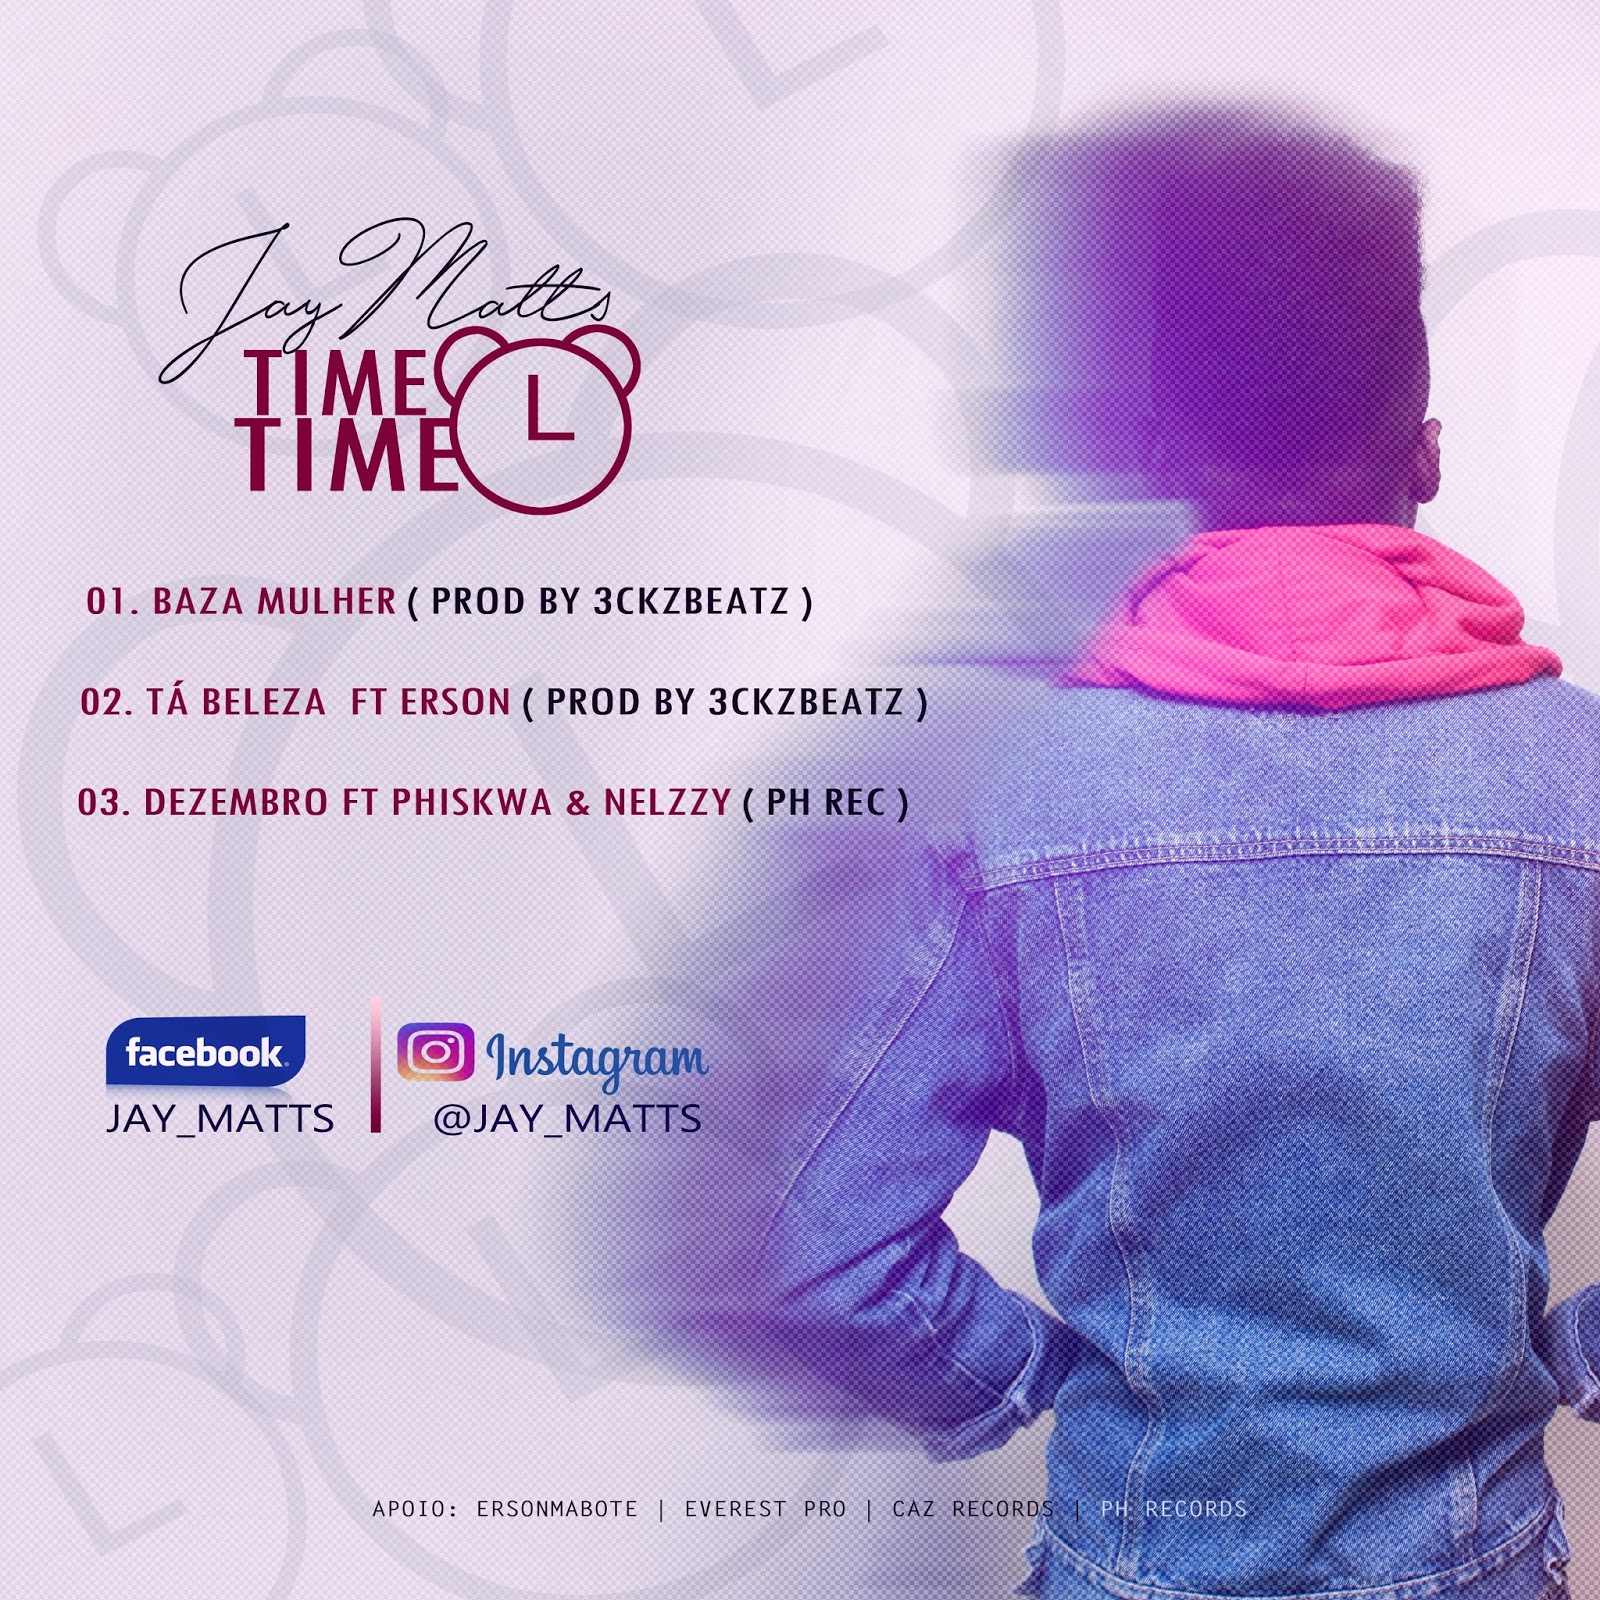 Jay Matts - TIME TIME (EP) BackCover